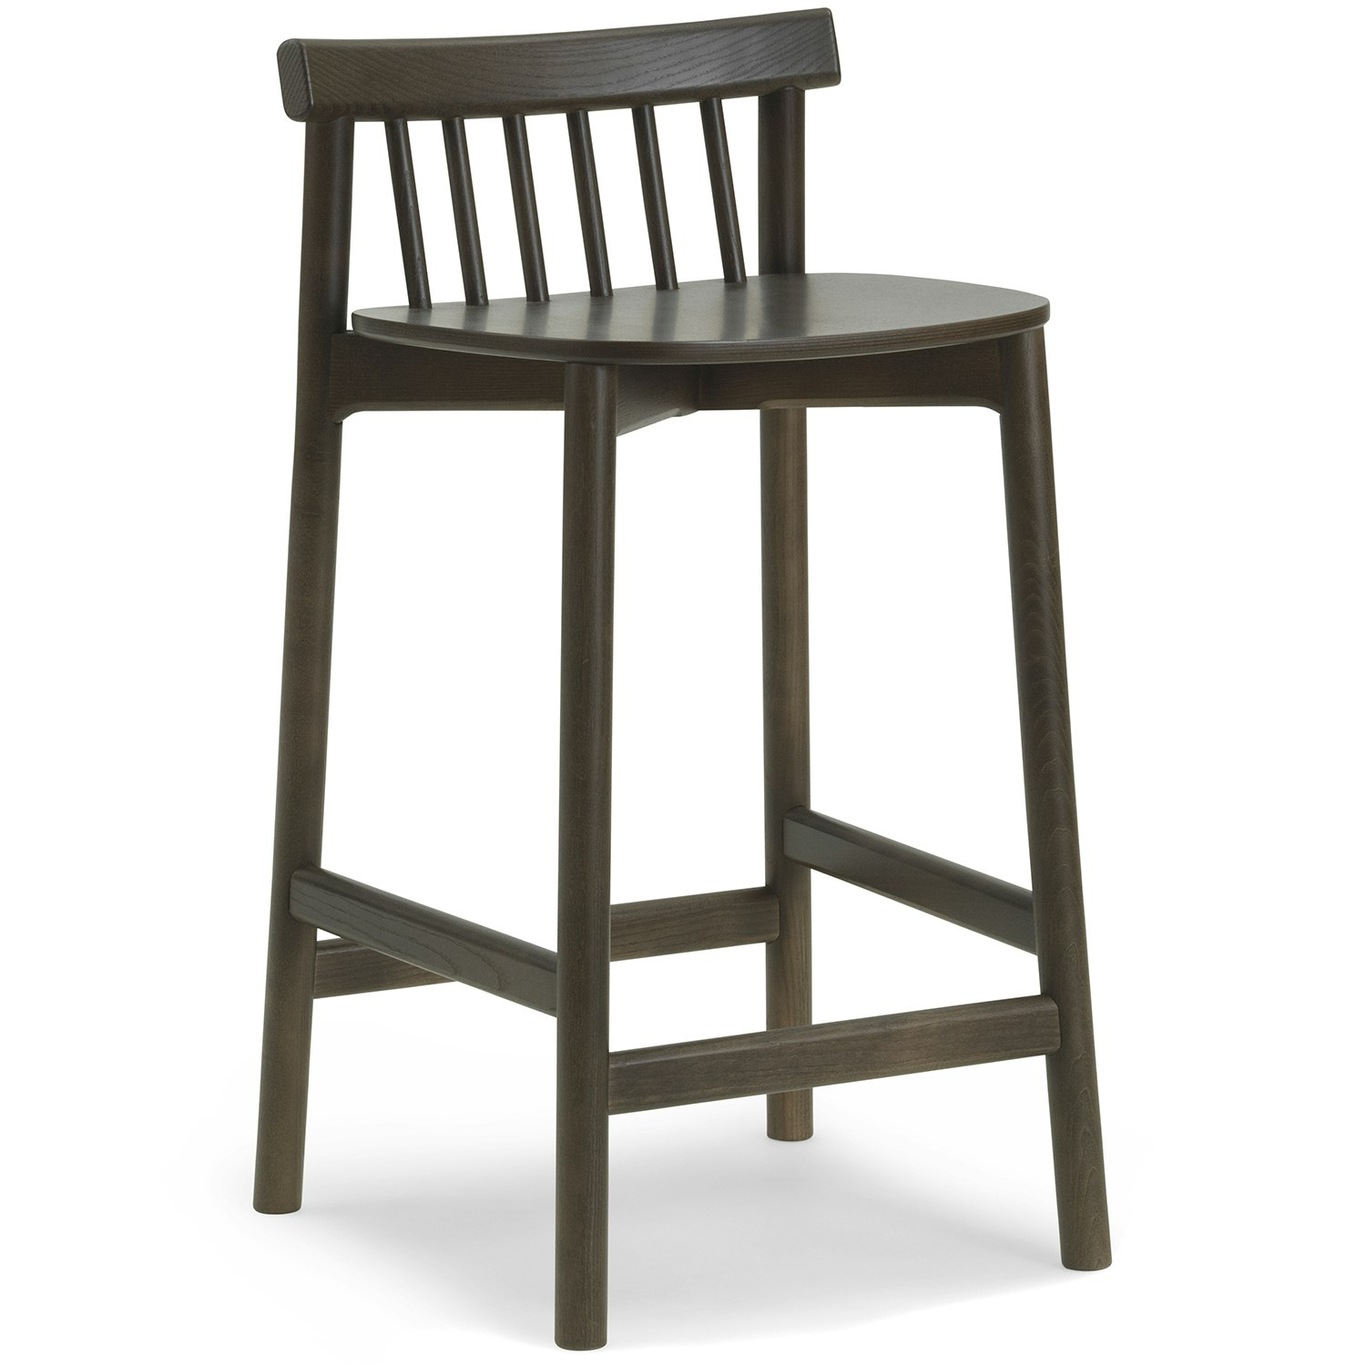 Pind Bar Stool 65 cm, Dark Stained Ash